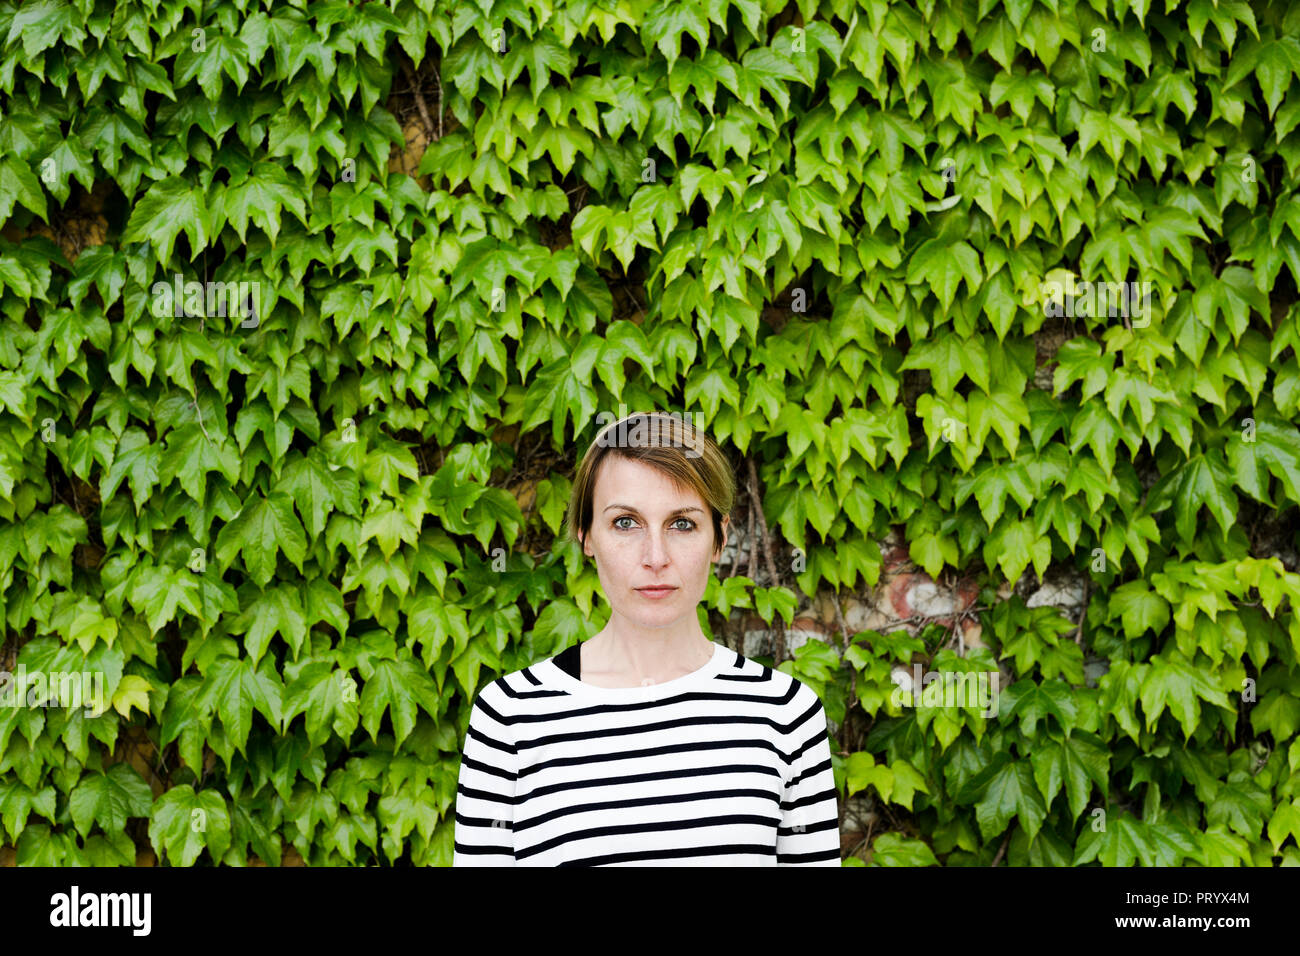 Portrait of woman in front of facade greenery Stock Photo